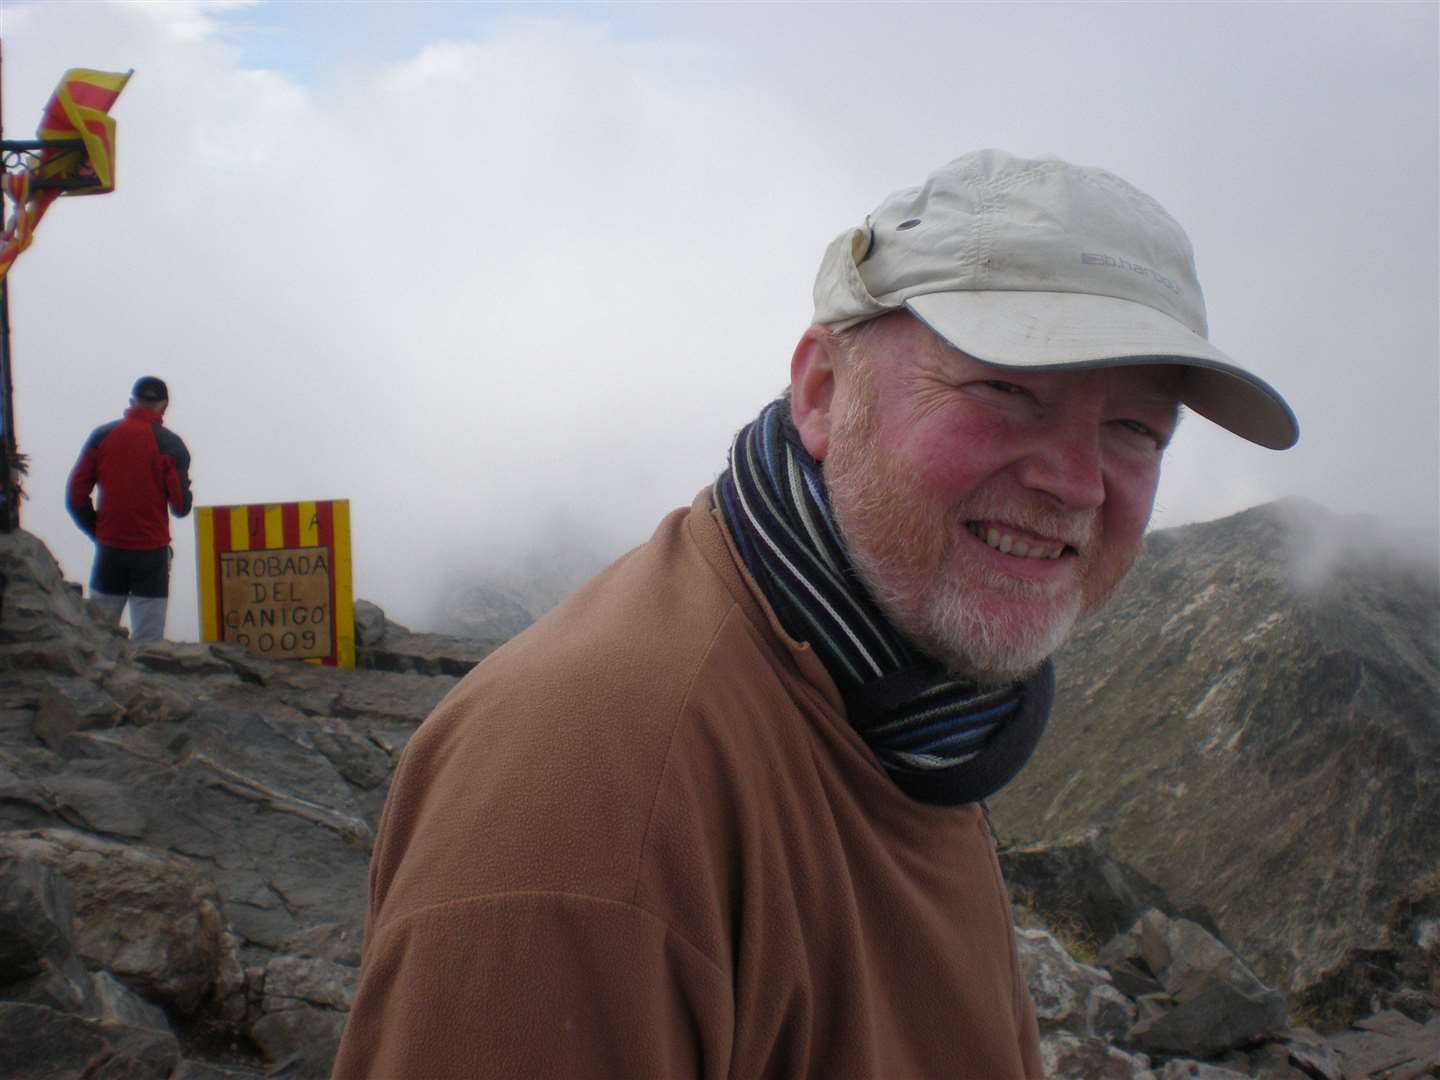 Tributes have been paid to Martin McKay, from Gravesend, who has died aged 60. He loved the outdoors and is pictured in the Pyrenees